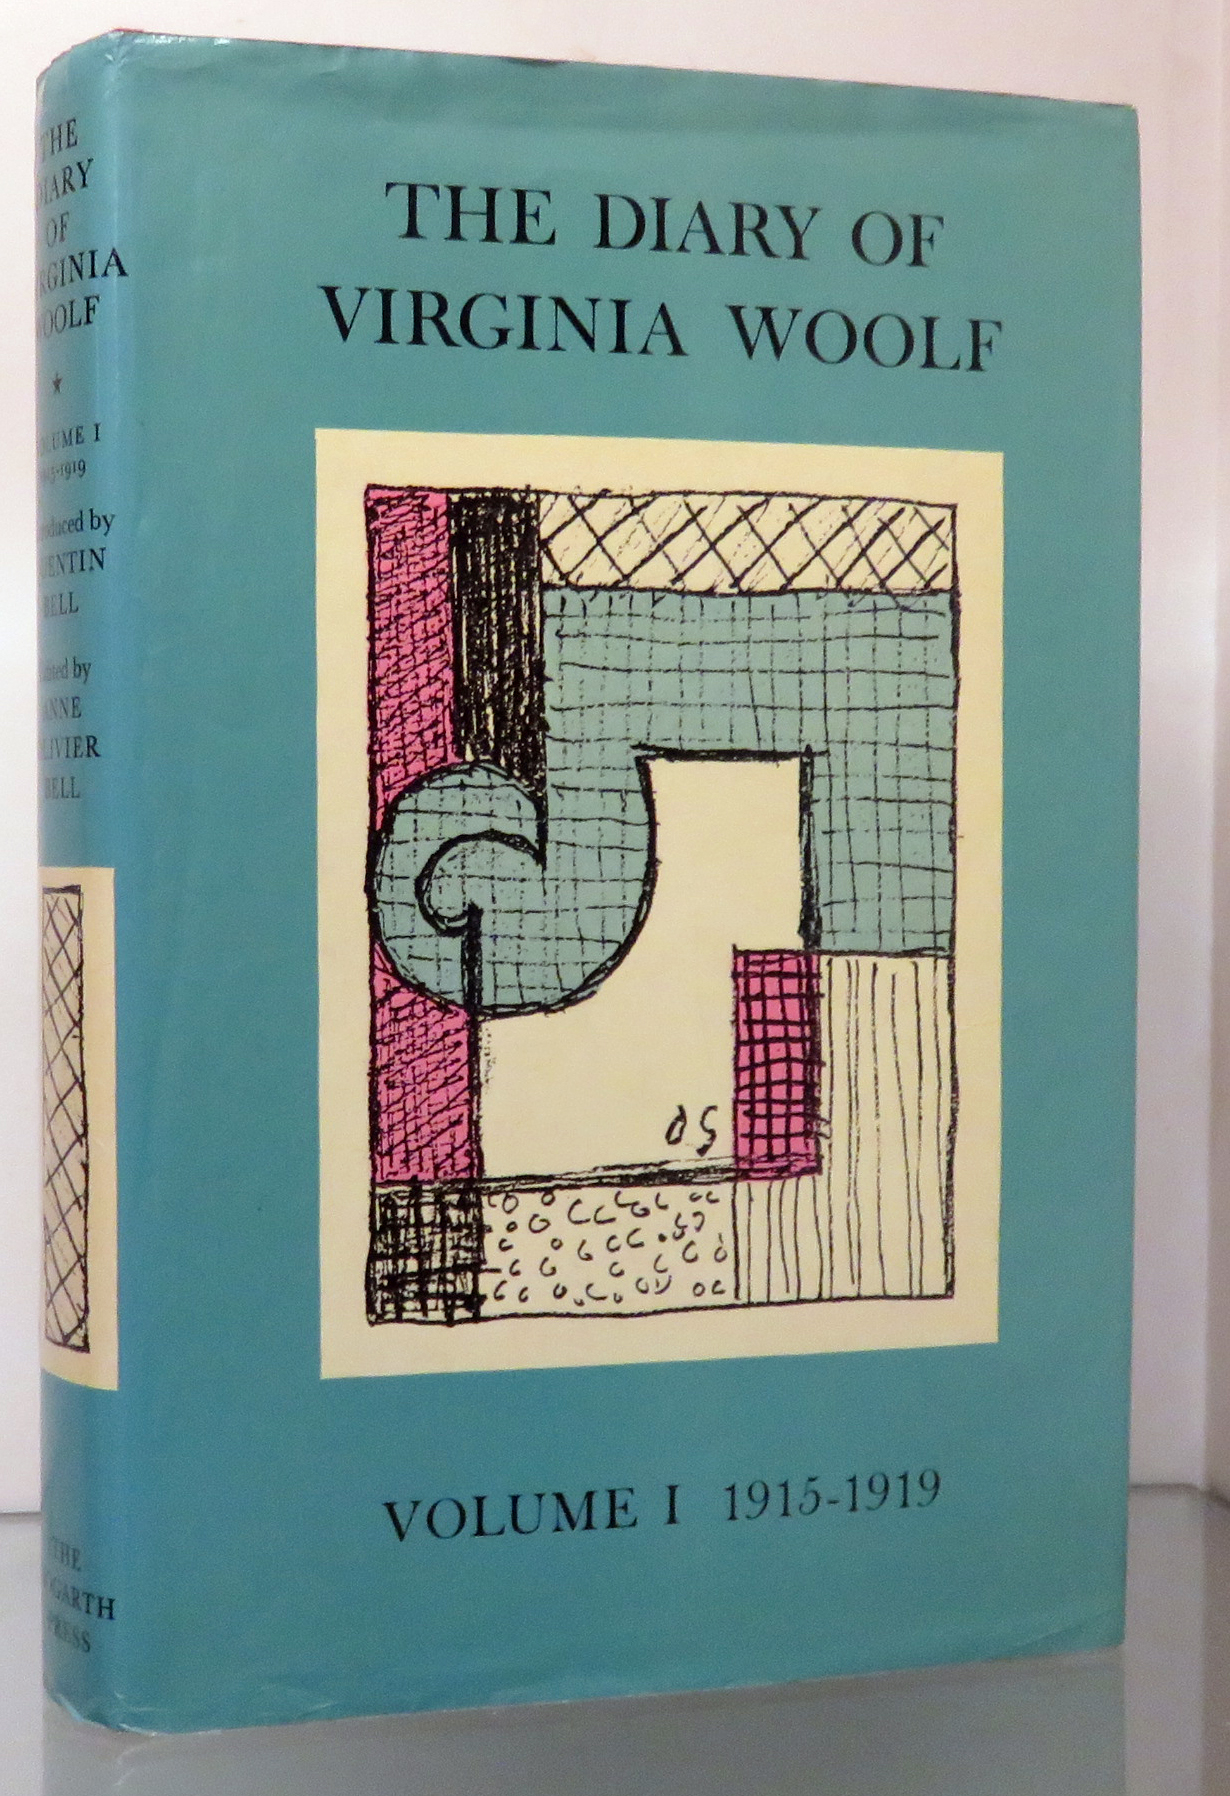 The Diary Of Virginia Woolf Volume I; 1915-1919